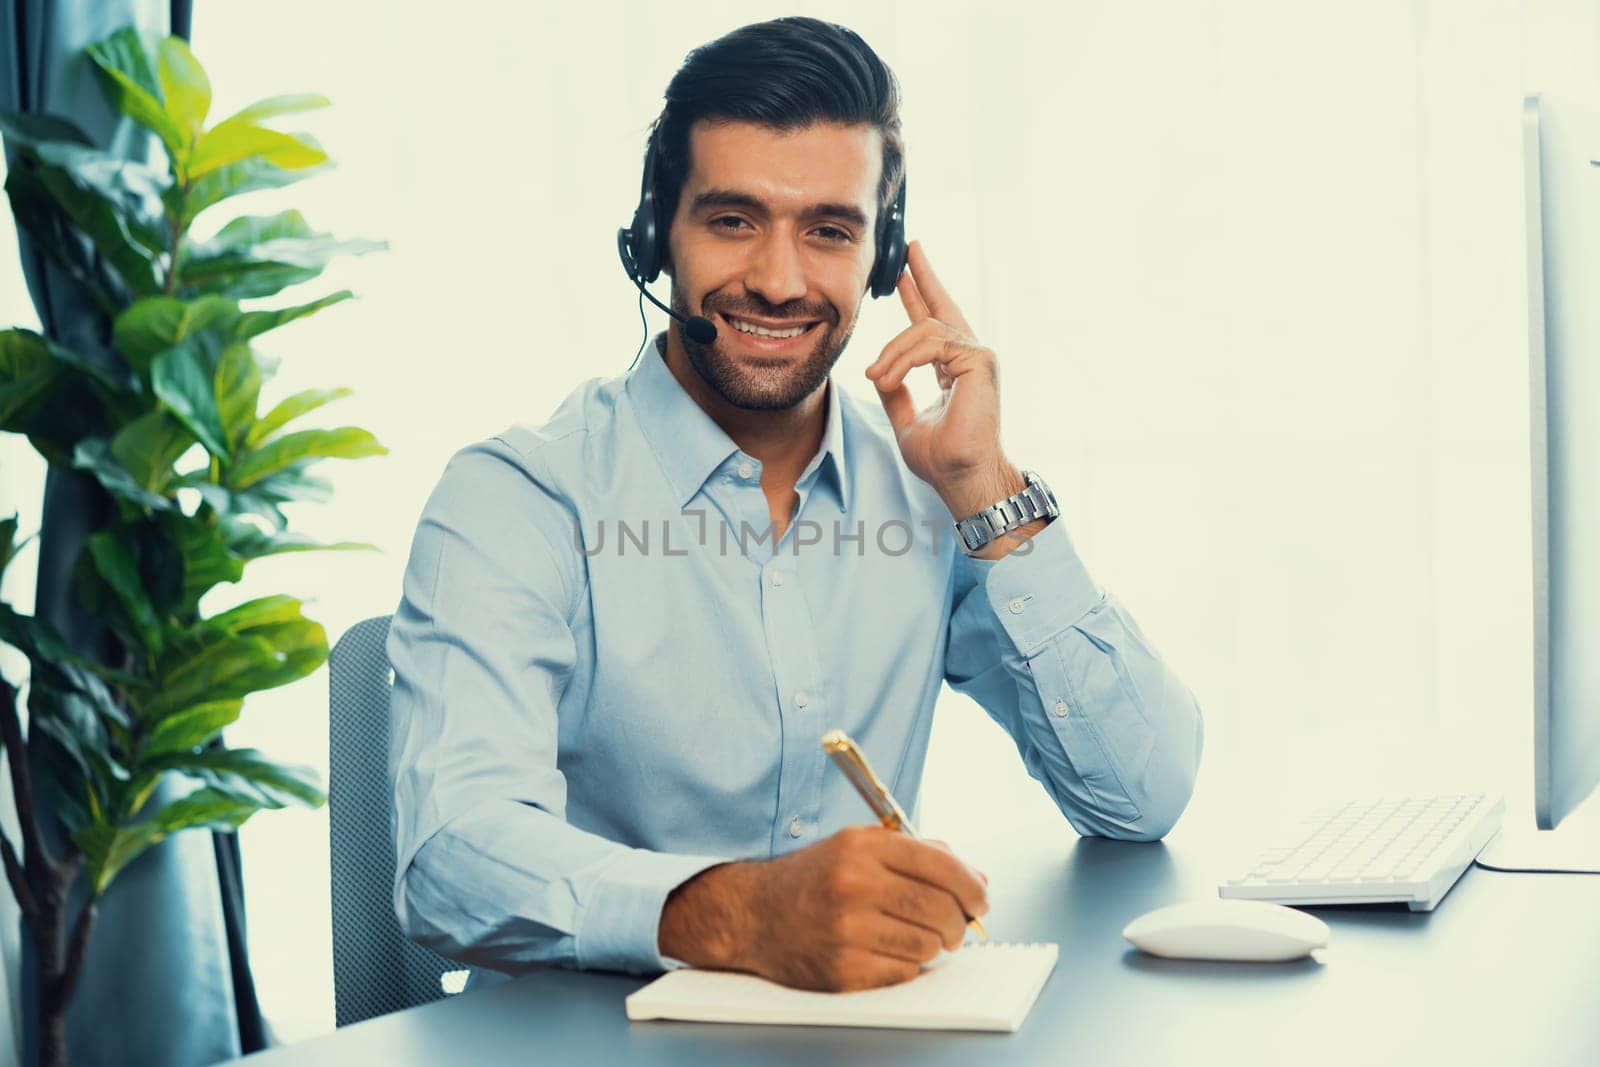 Male call center operator or telesales representative siting at his office desk wearing headset portrait. Customer service agent with smiling to camera on workplace. fervent